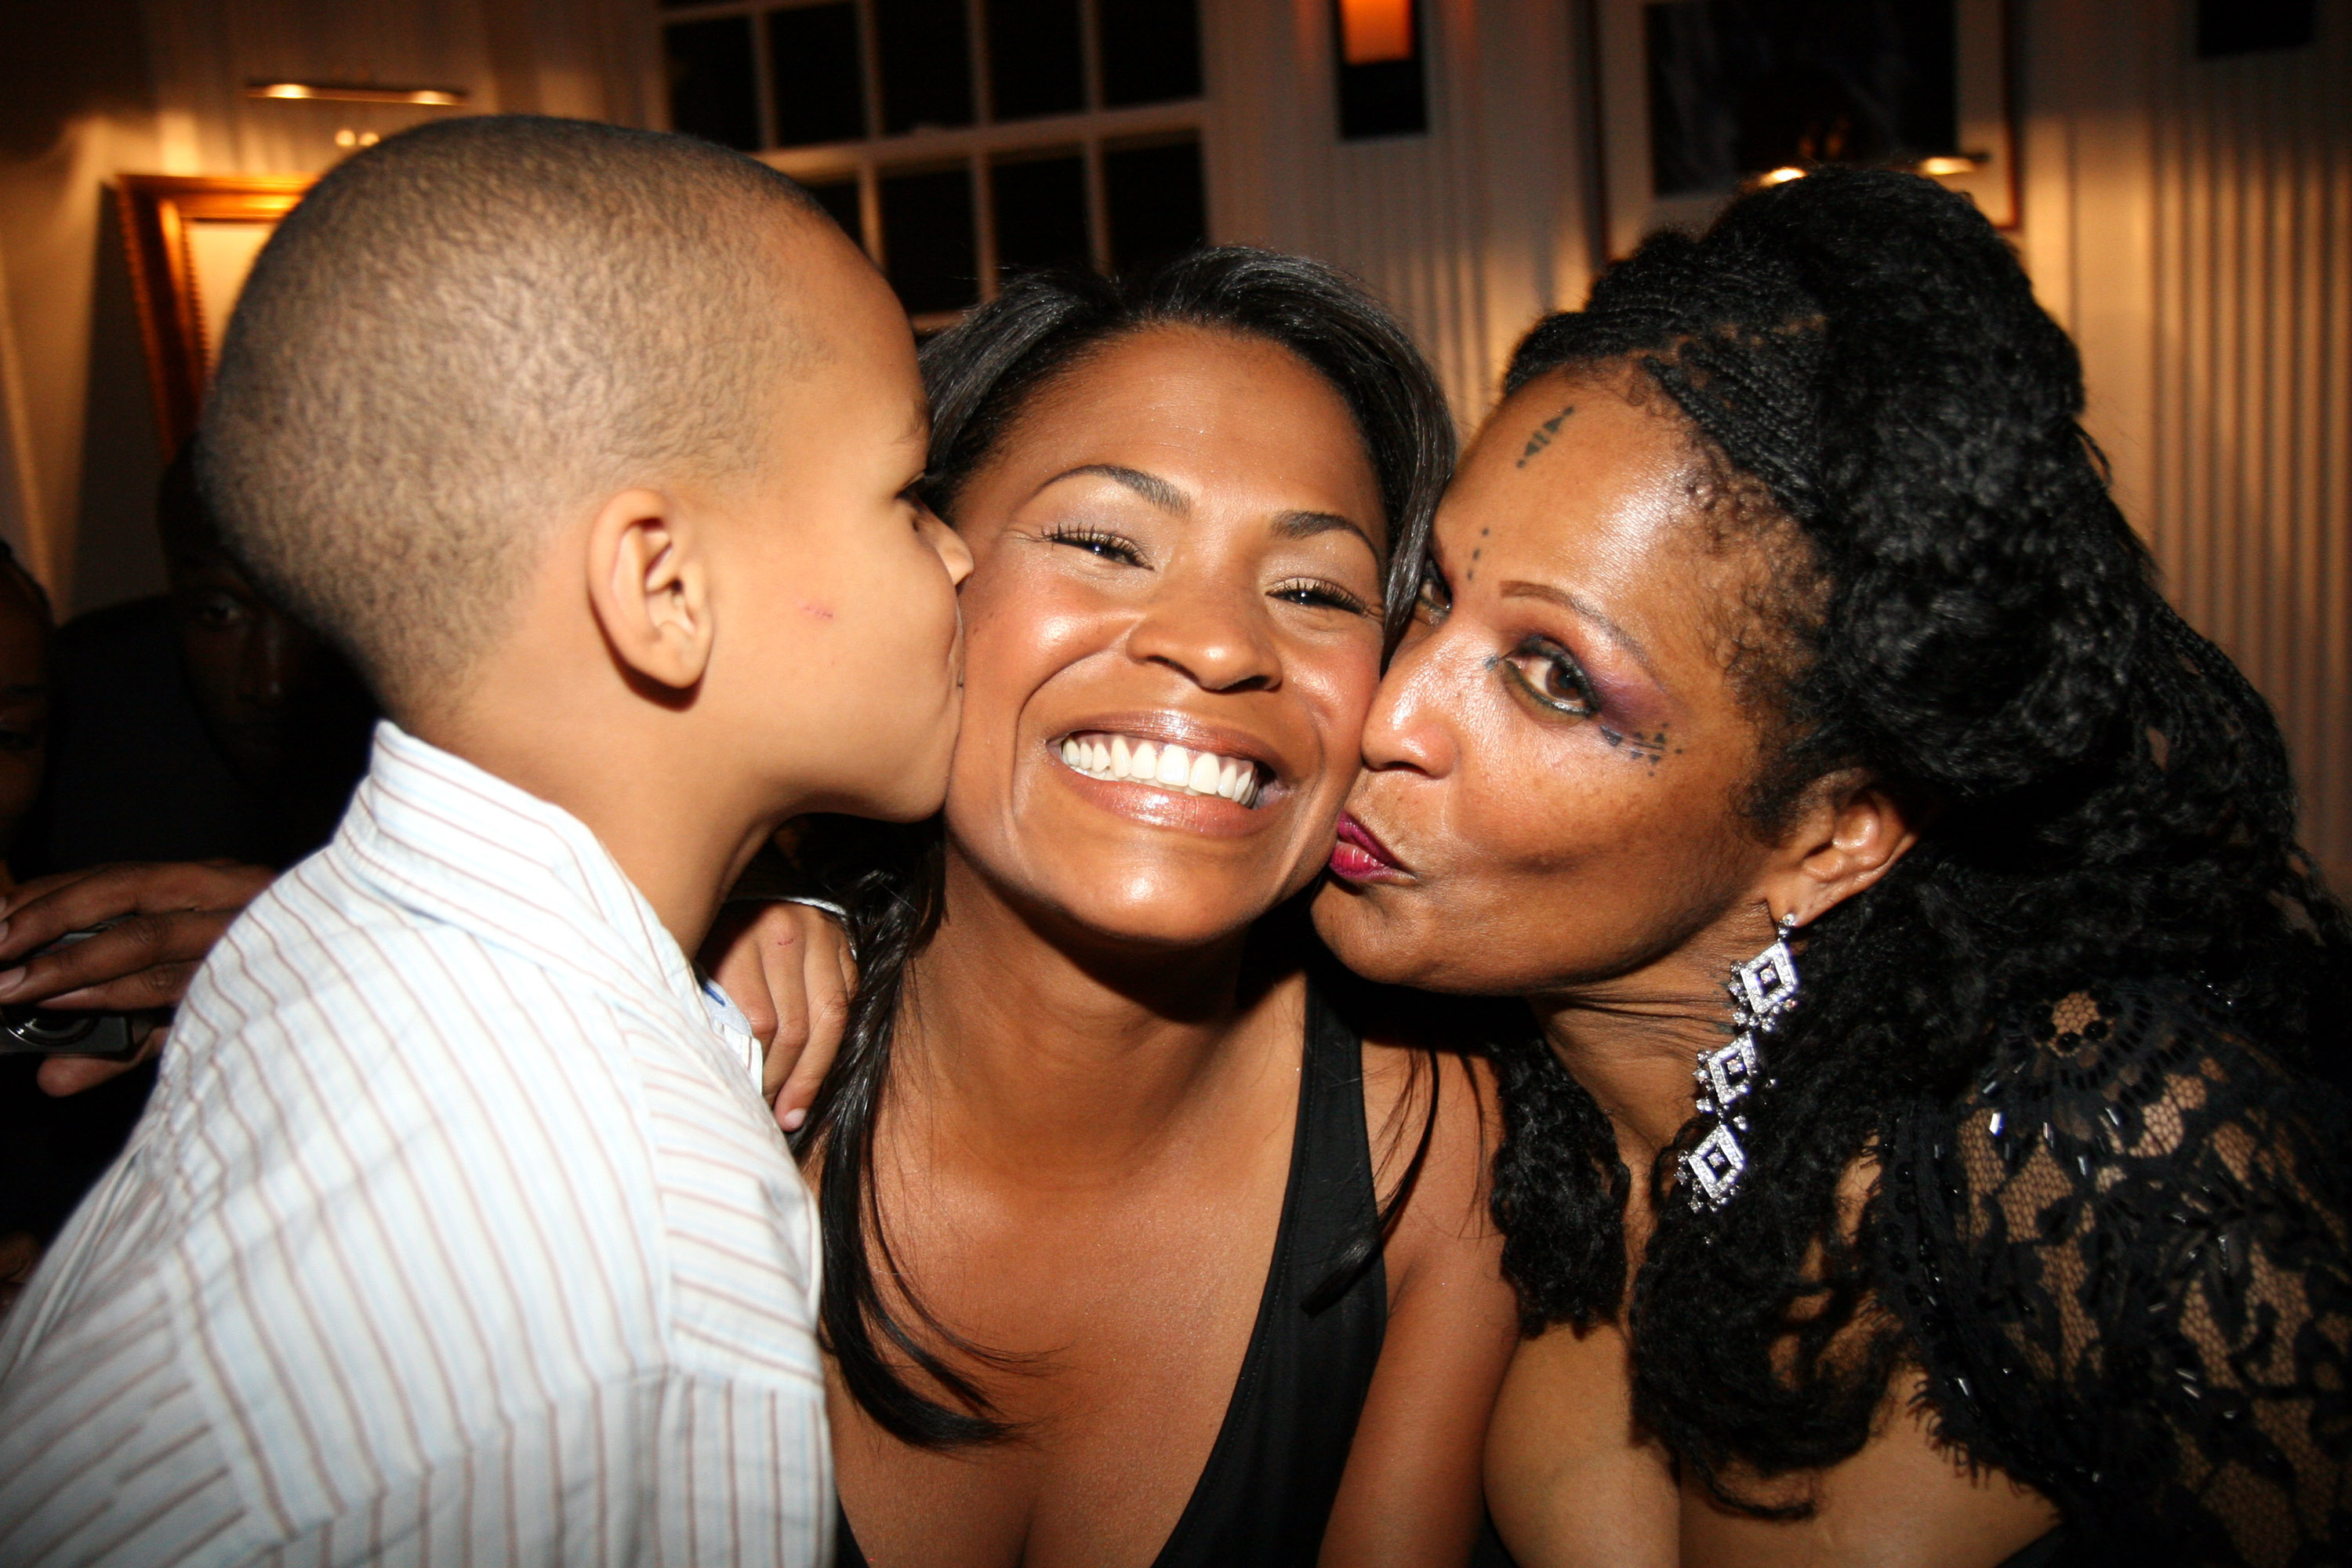 Massai Zhivago Dorsey II, Nia Long and Talita Long at Martell Presents: "Discover Noblige" on March 29, 2007. | Source: Getty Images